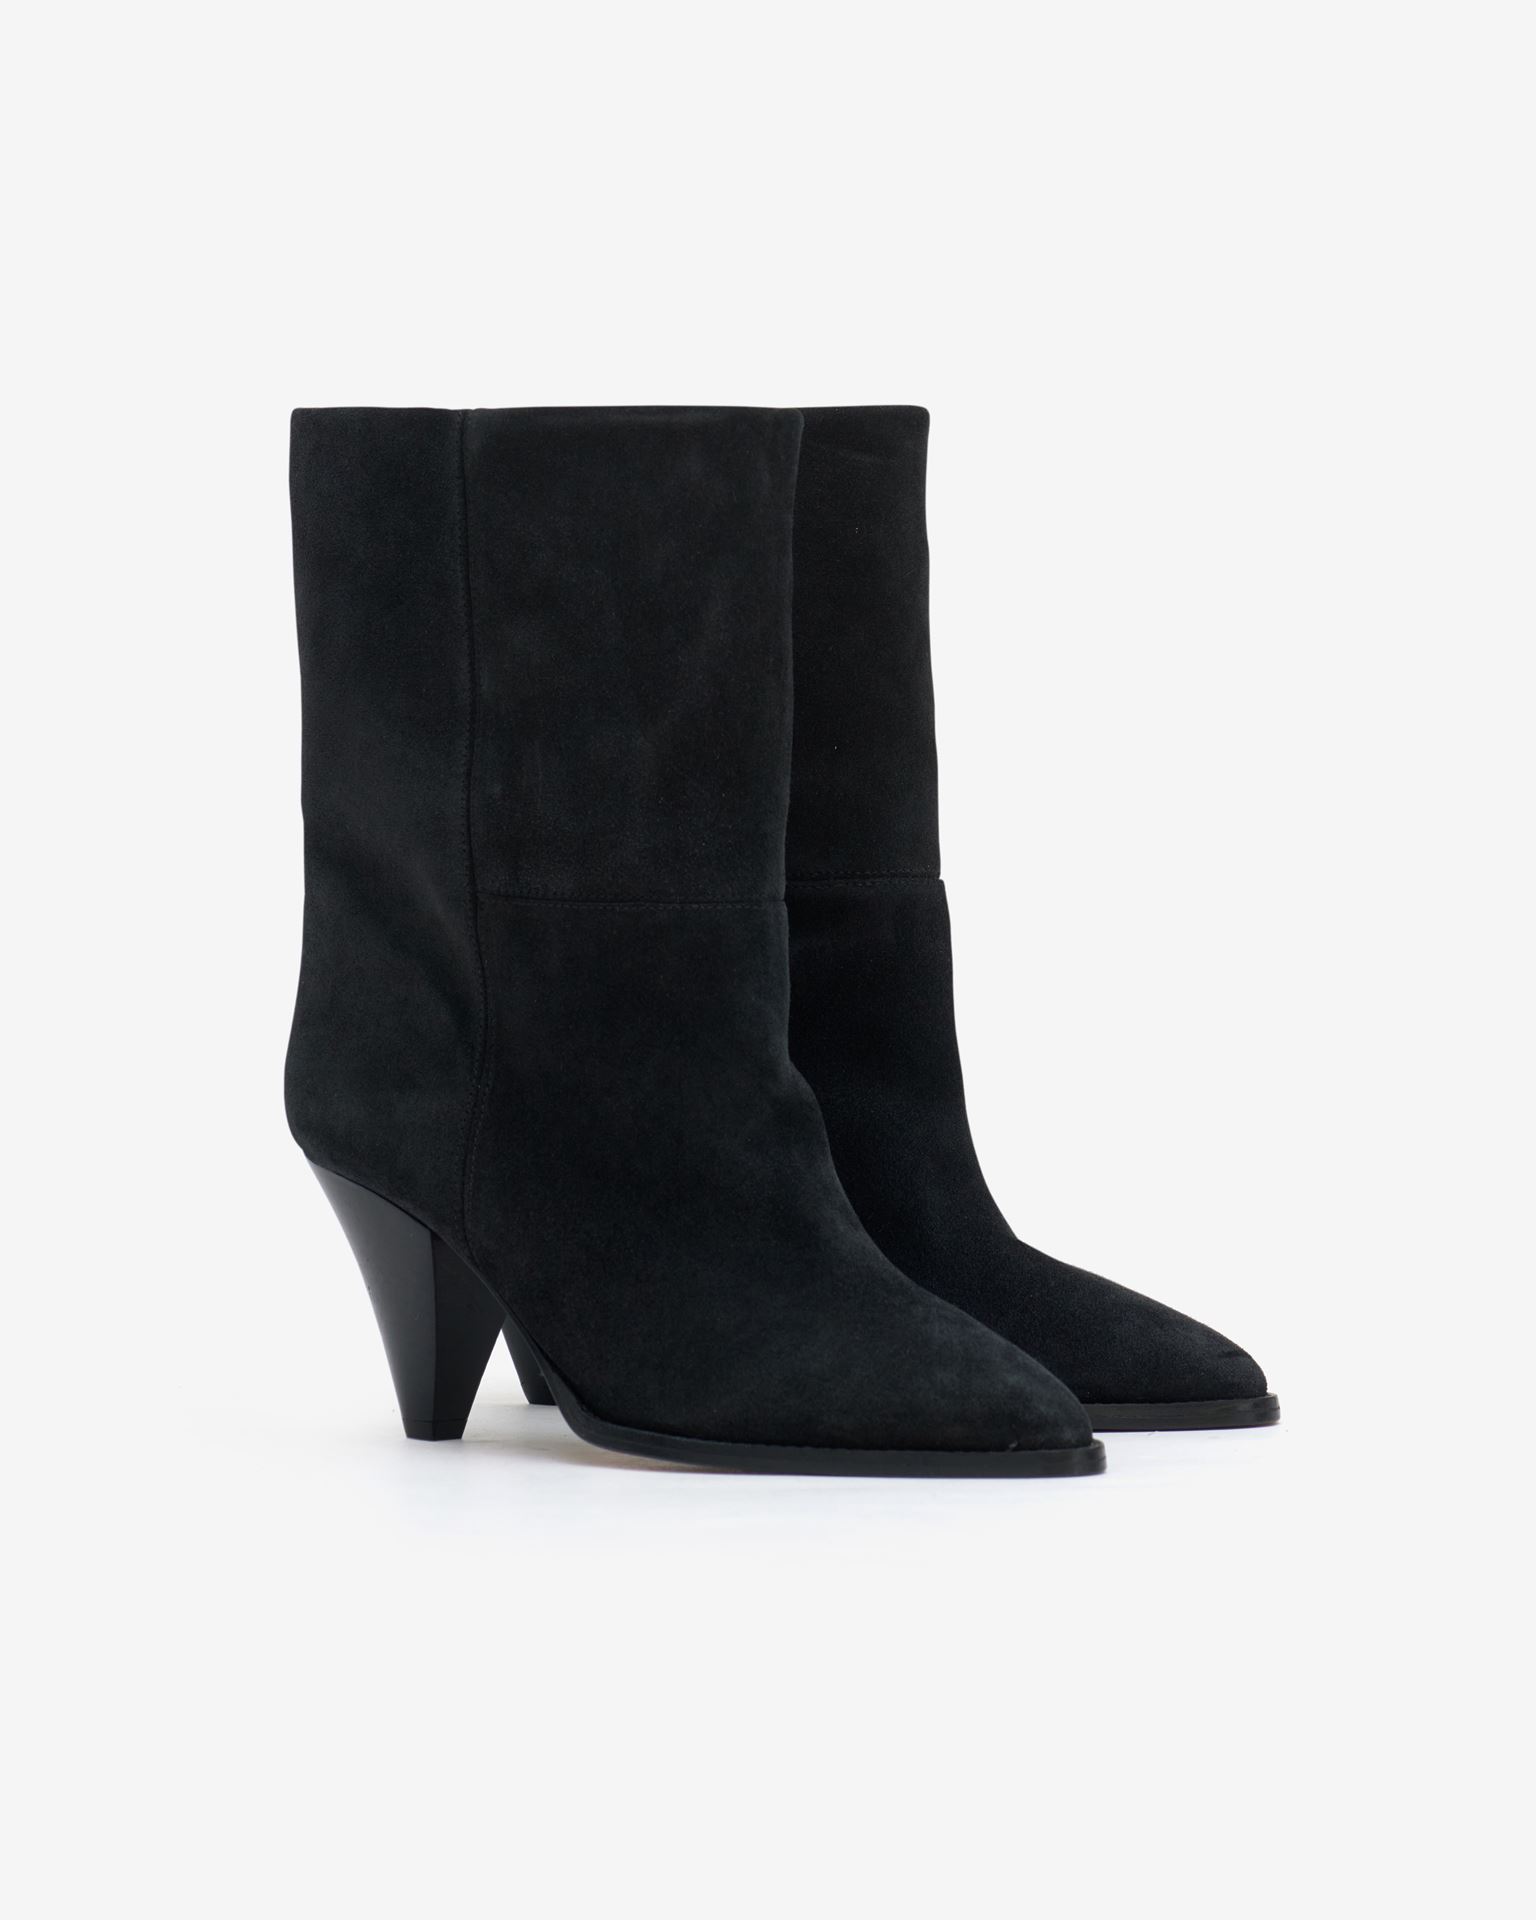 Isabel Marant, Rouxa Calf Leather Low Boots - Women - Black